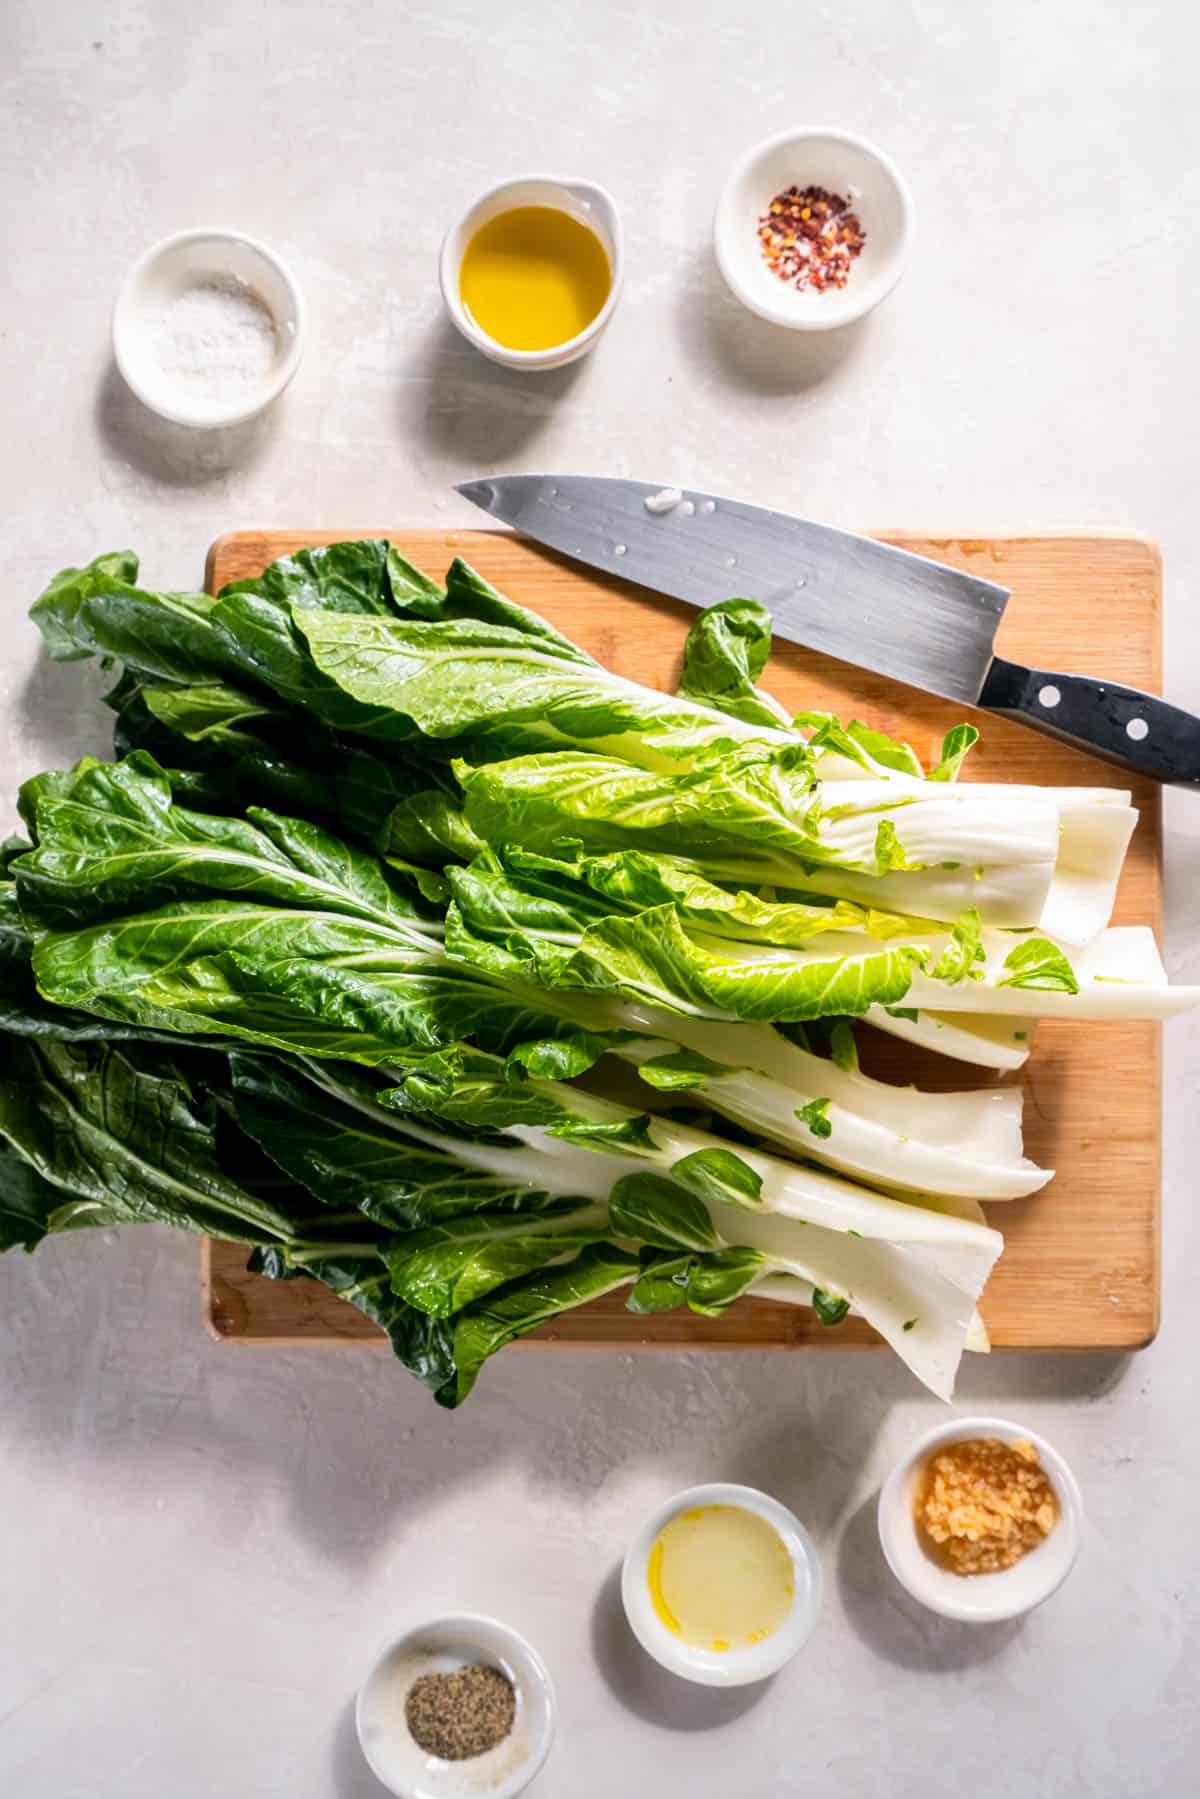 All of the ingredients for roasted bok choy on a white countertop in bowls including garlic, salt and pepper, red pepper flakes, olive oil, lemon juice and bok choy.